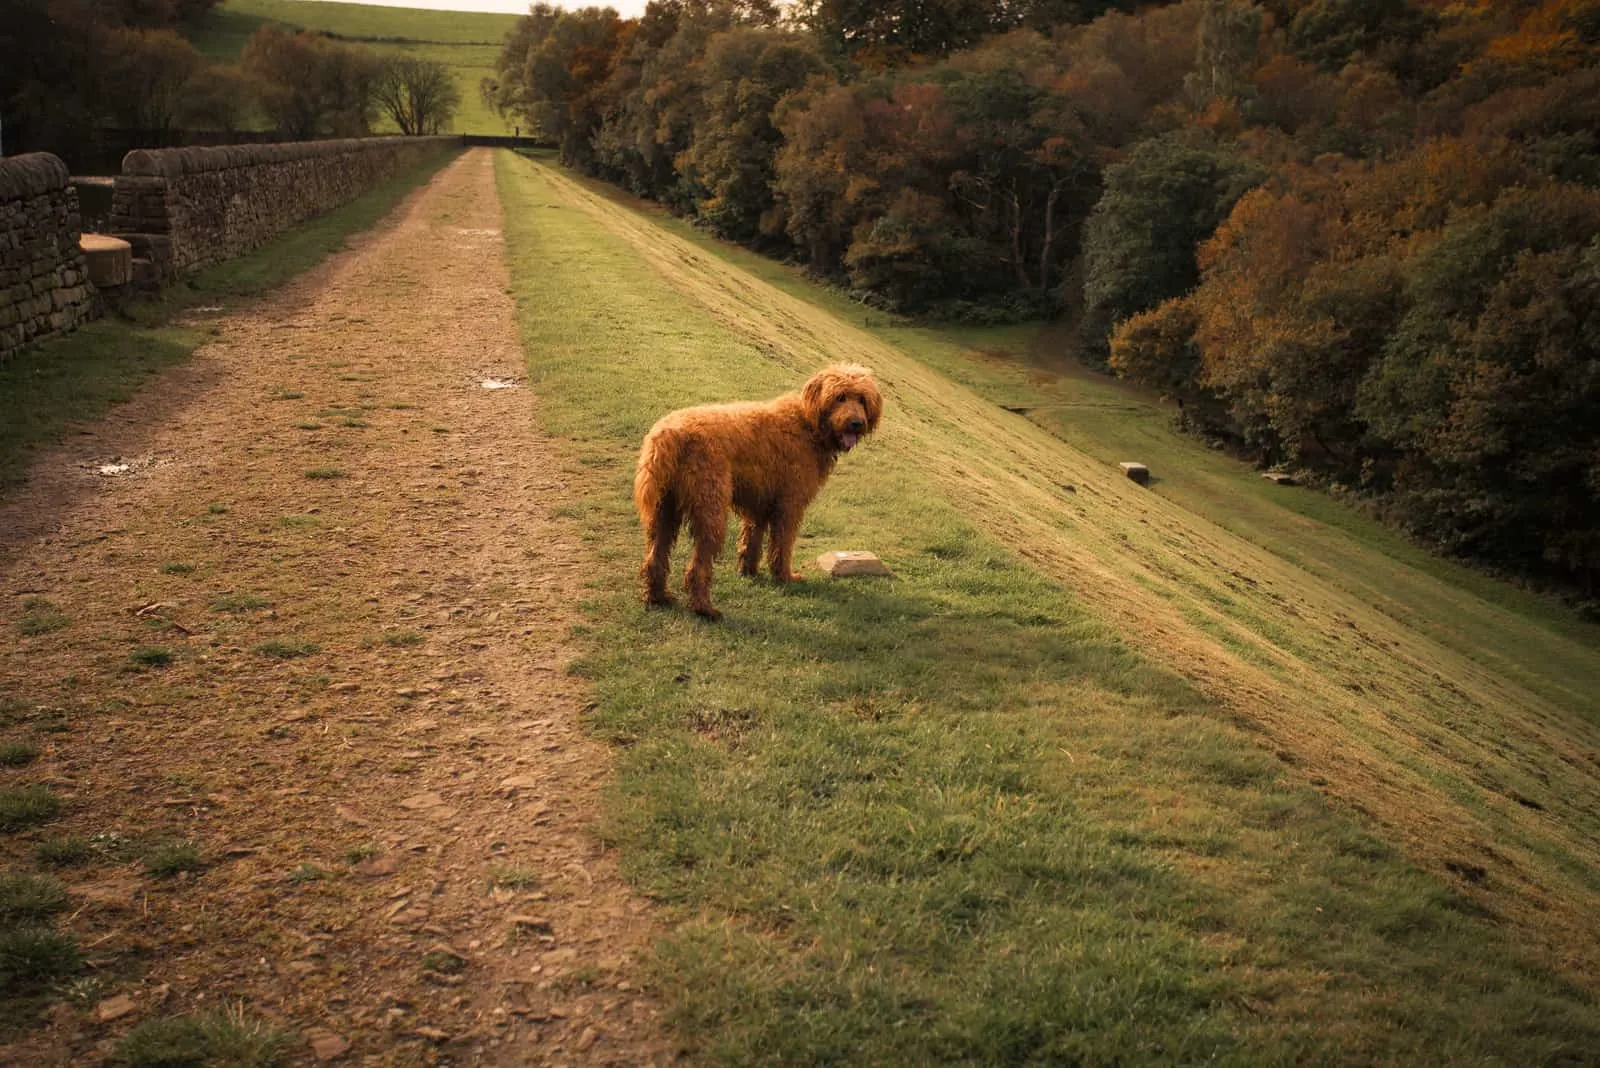 goldendoodle dog stands in a natural autumn setting